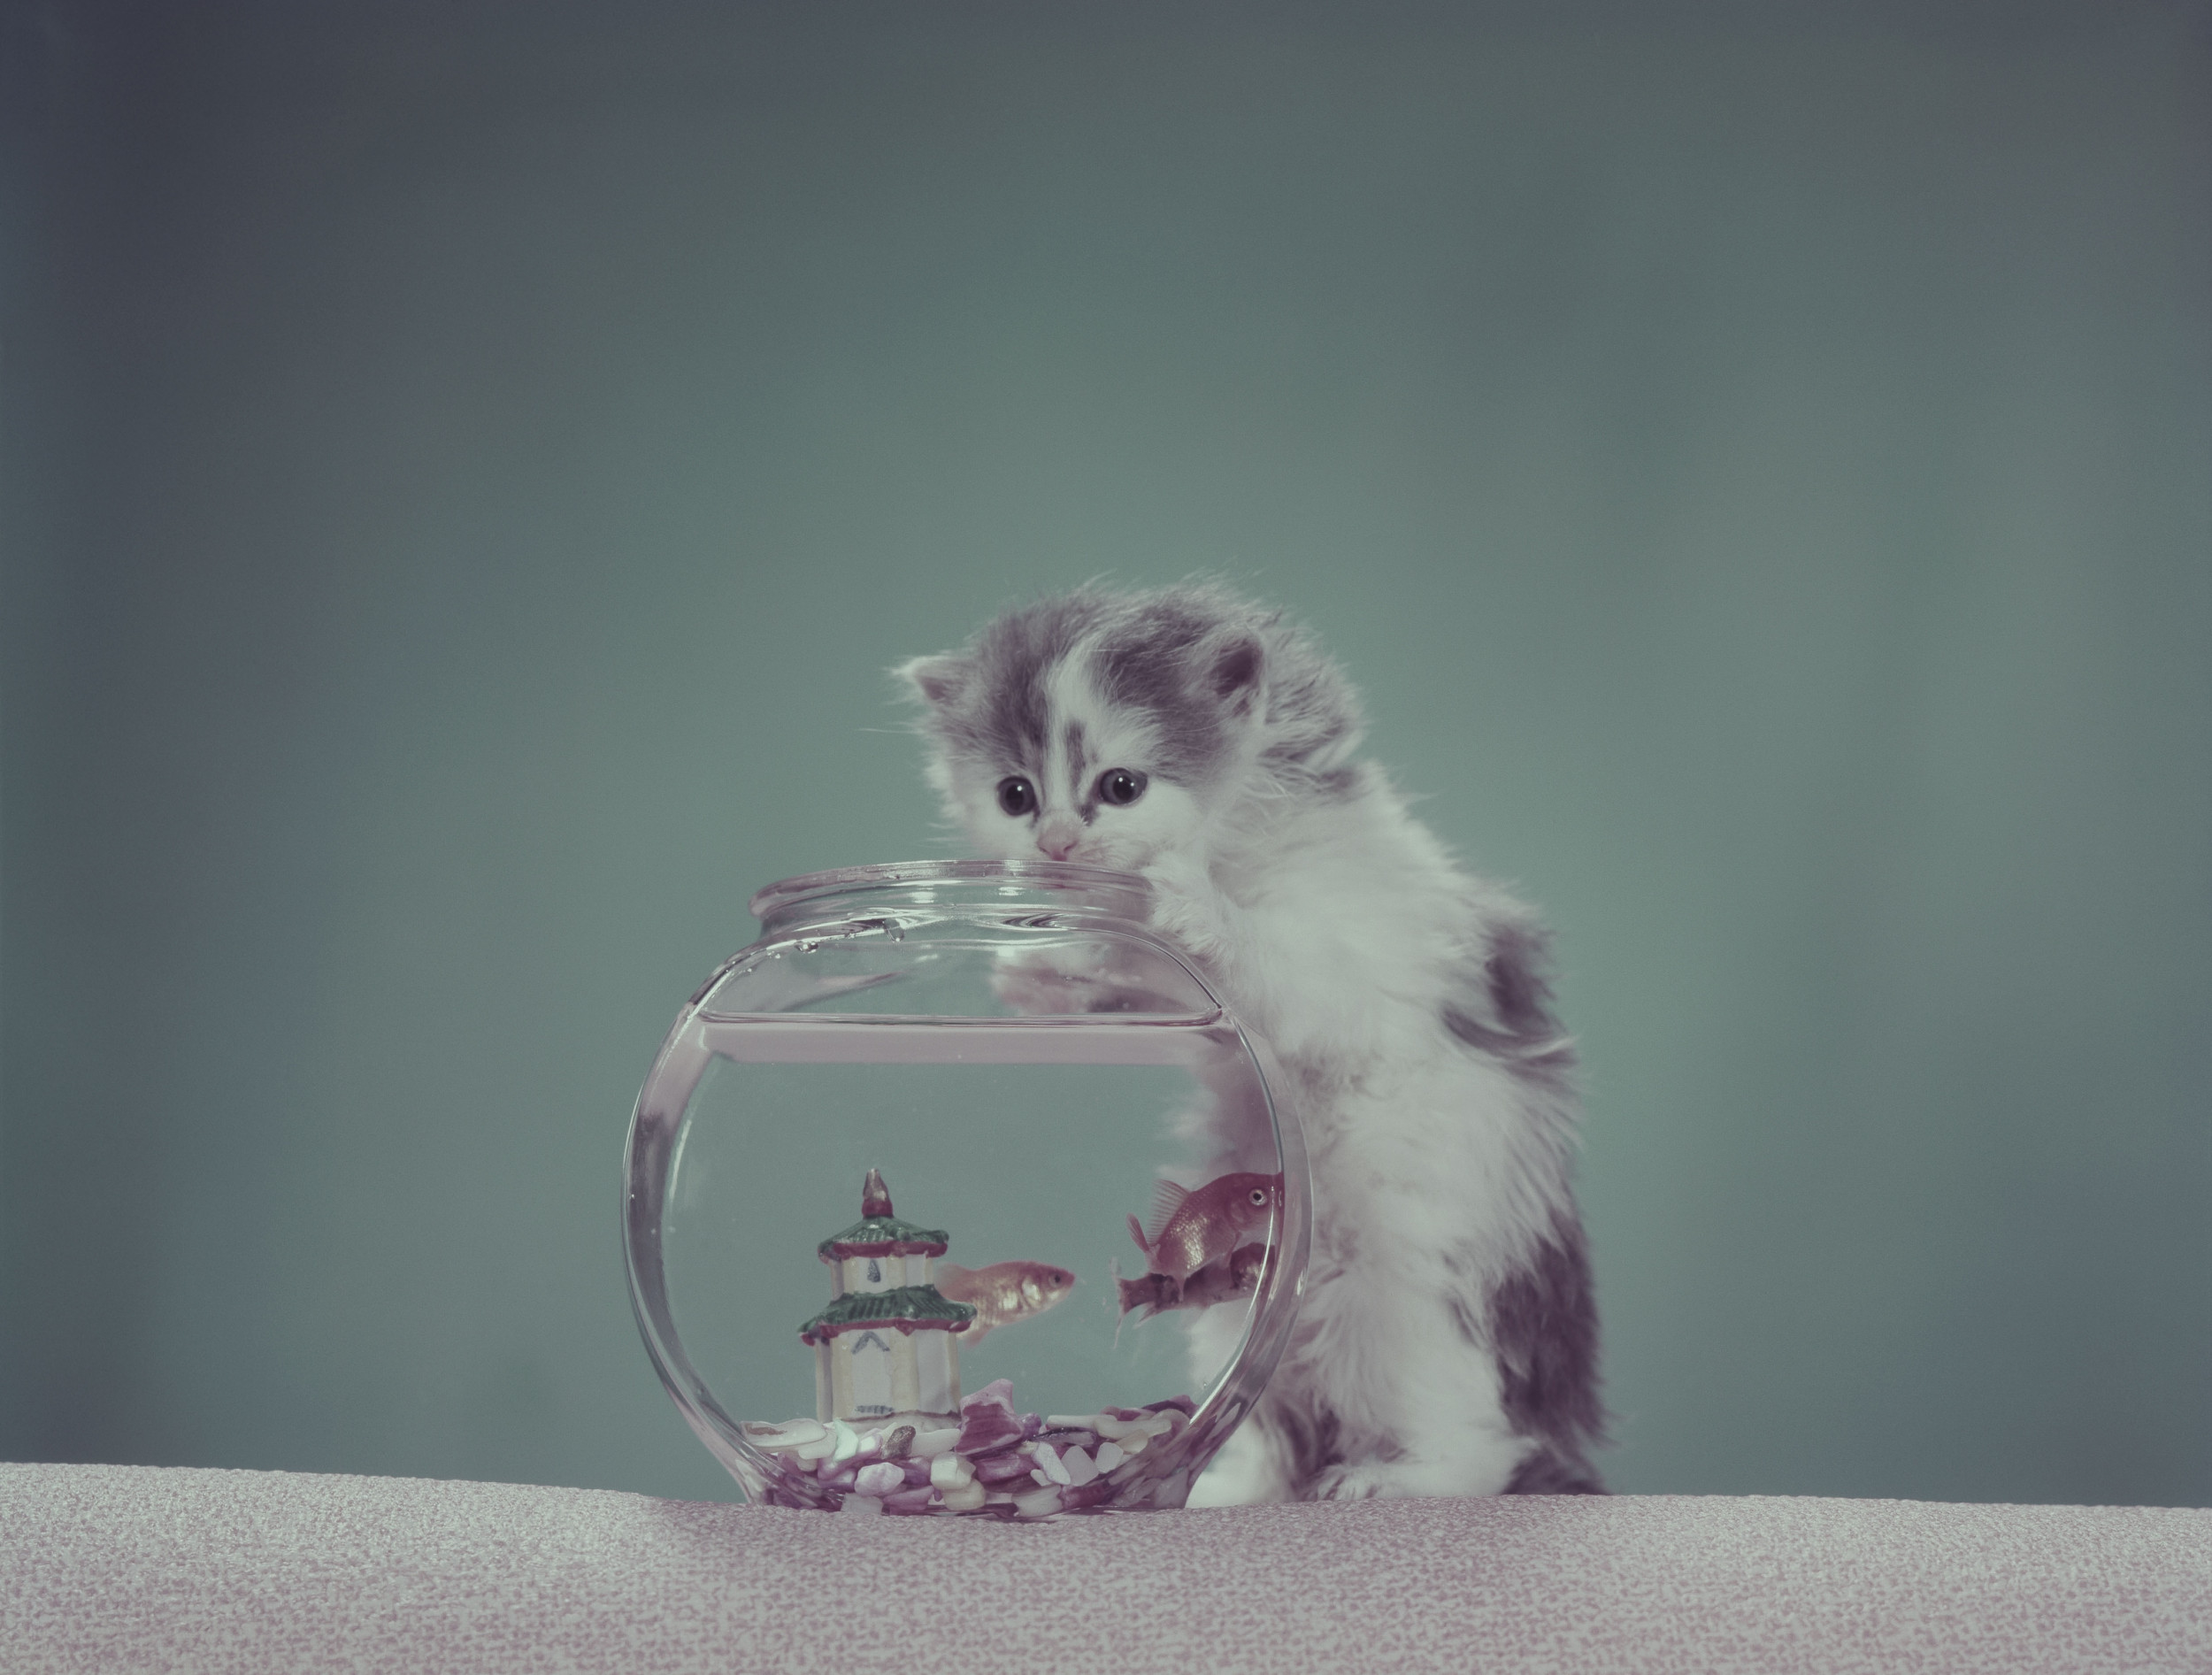 Why Do Cats Hate Water? 6 Reasons Your Kitty Won’t Take a Swim